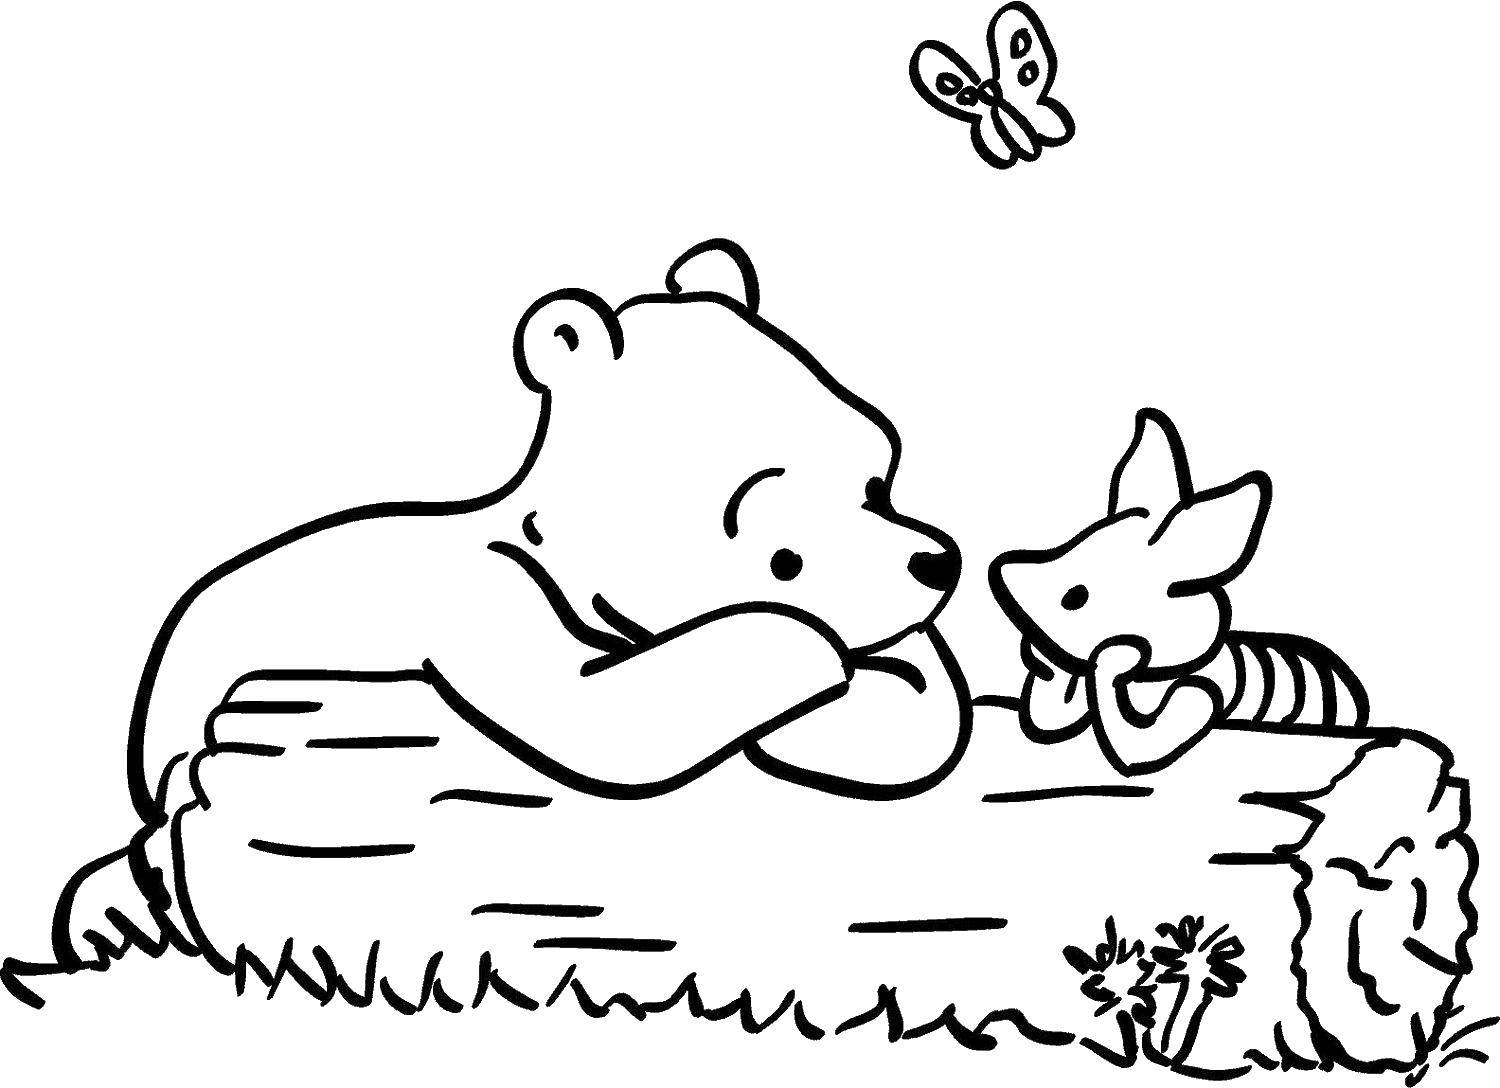 Coloring Winnie the Pooh and Piglet. Category Cartoon character. Tags:  Cartoon character, Winnie the Pooh, Piglet.